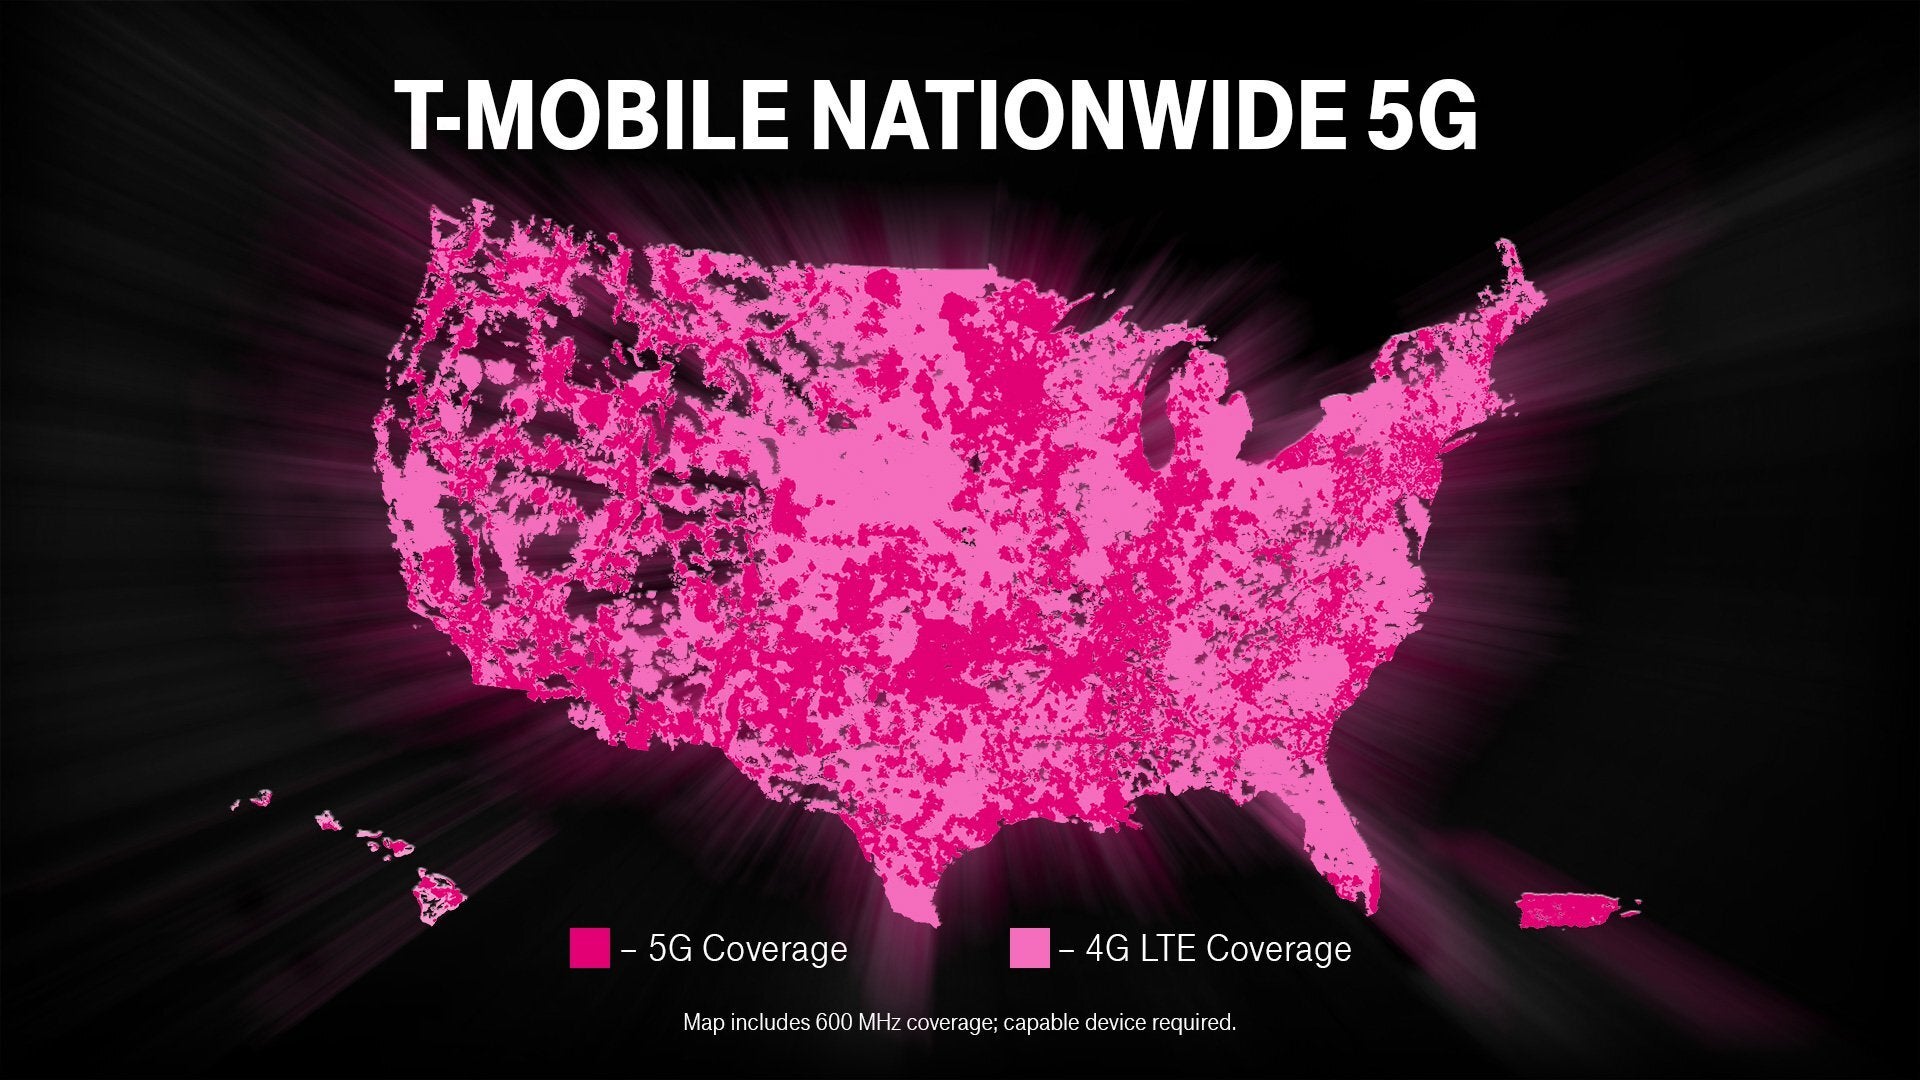 T-Mobile's 5G network now covers over 200 million Americans - Judge wants quick resolution of trial that seeks to block T-Mobile-Sprint merger